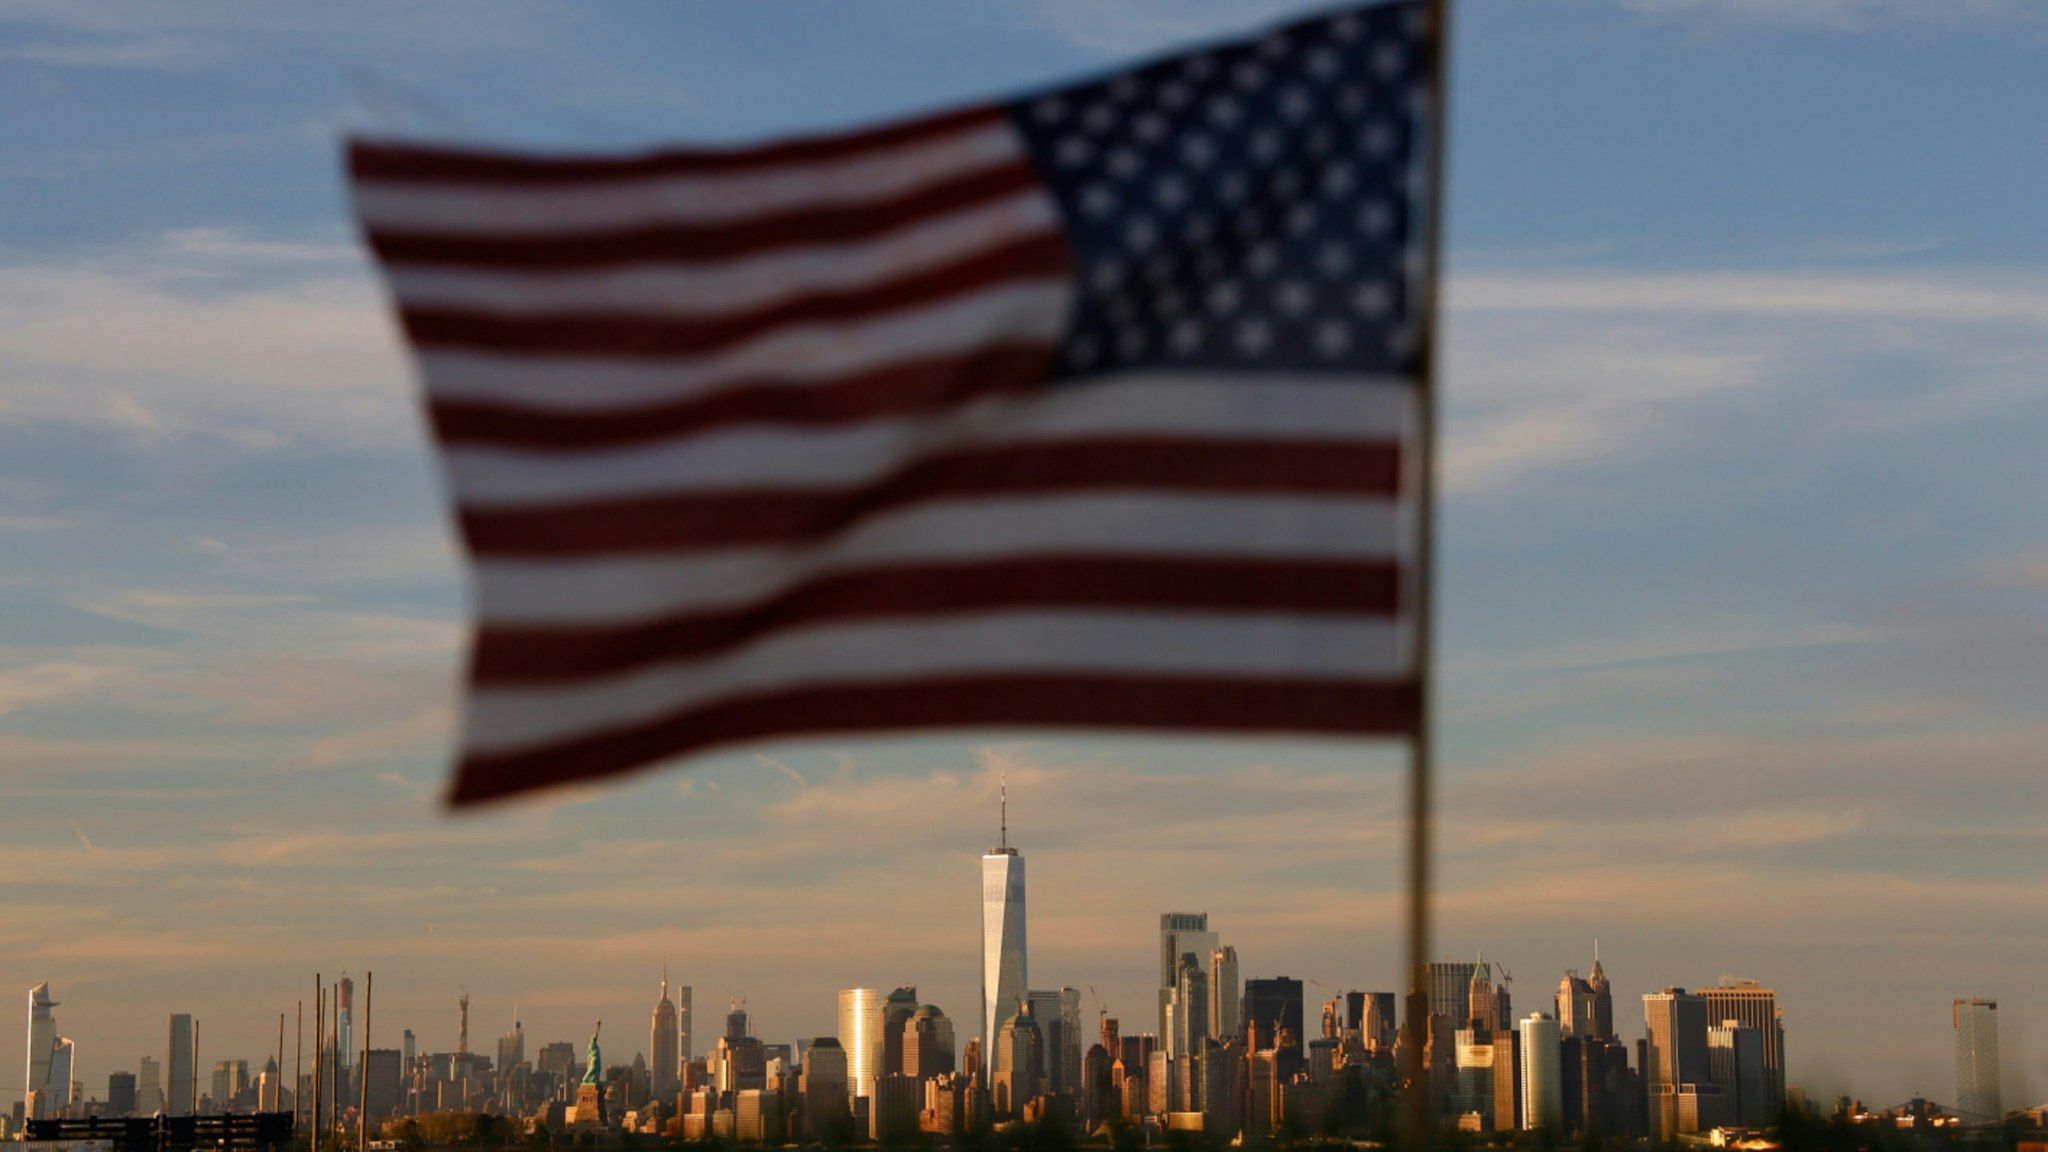 The sun sets on the skyline of lower Manhattan, the Statue of Liberty and the Empire State Building in New York City as an American flag flies at the Tear Drop 9/11 Memorial on June 9, 2019 in Bayonne, New Jersey.